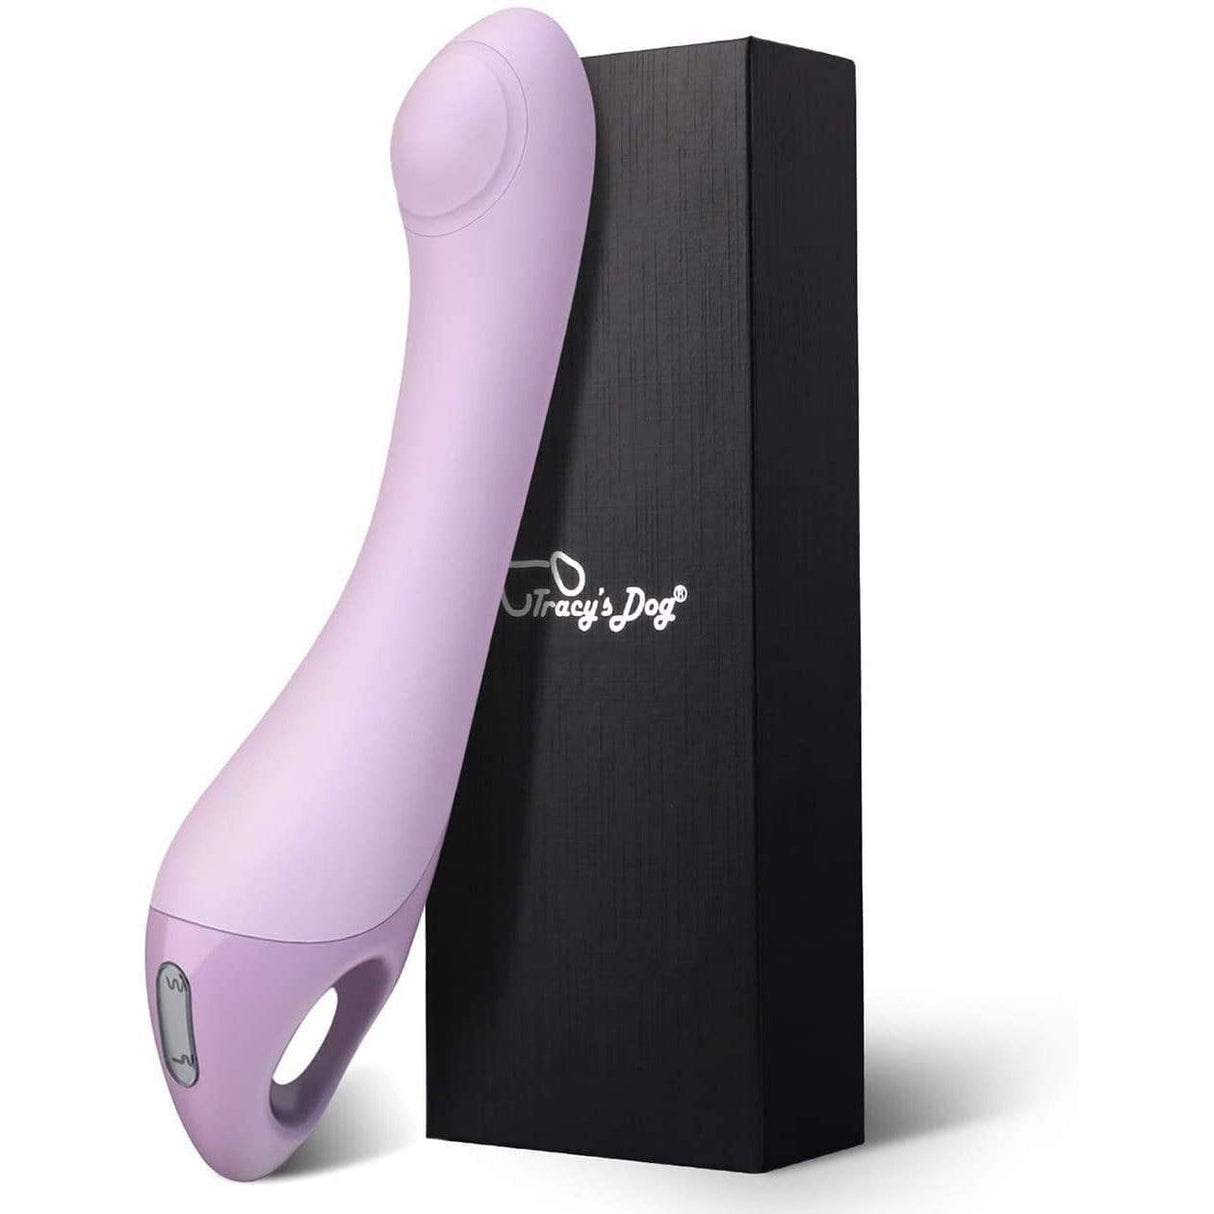 Tracy's Dog - Rechargeable G Spot Vibrator Pulsator (Purple)    G Spot Dildo (Vibration) Rechargeable